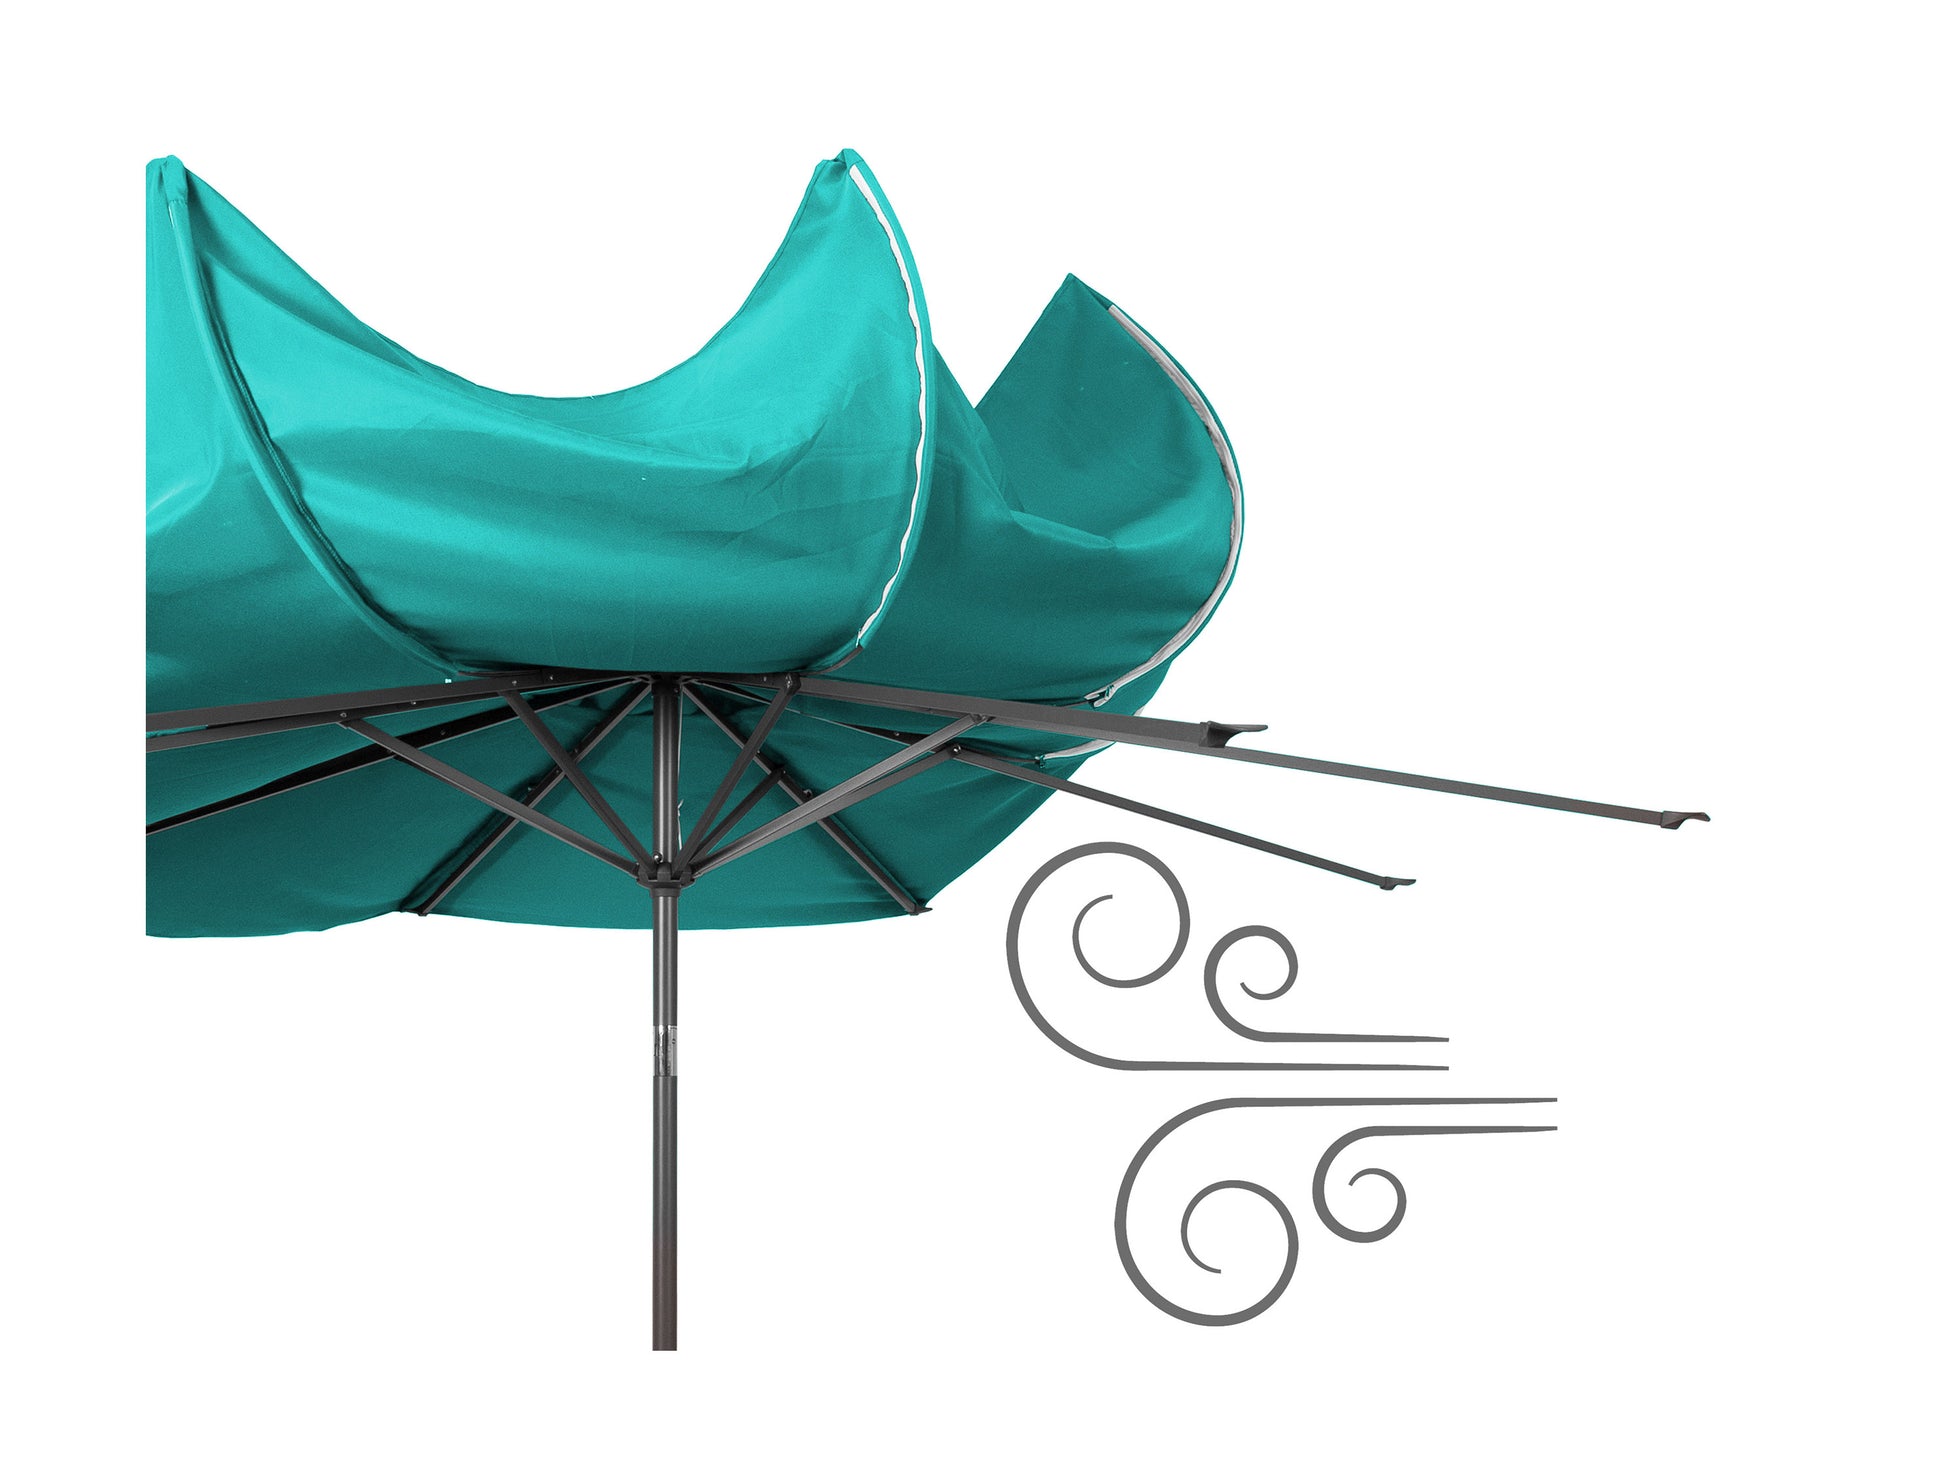 turquoise blue large patio umbrella, tilting 700 Series product image CorLiving#color_ppu-turquoise-blue